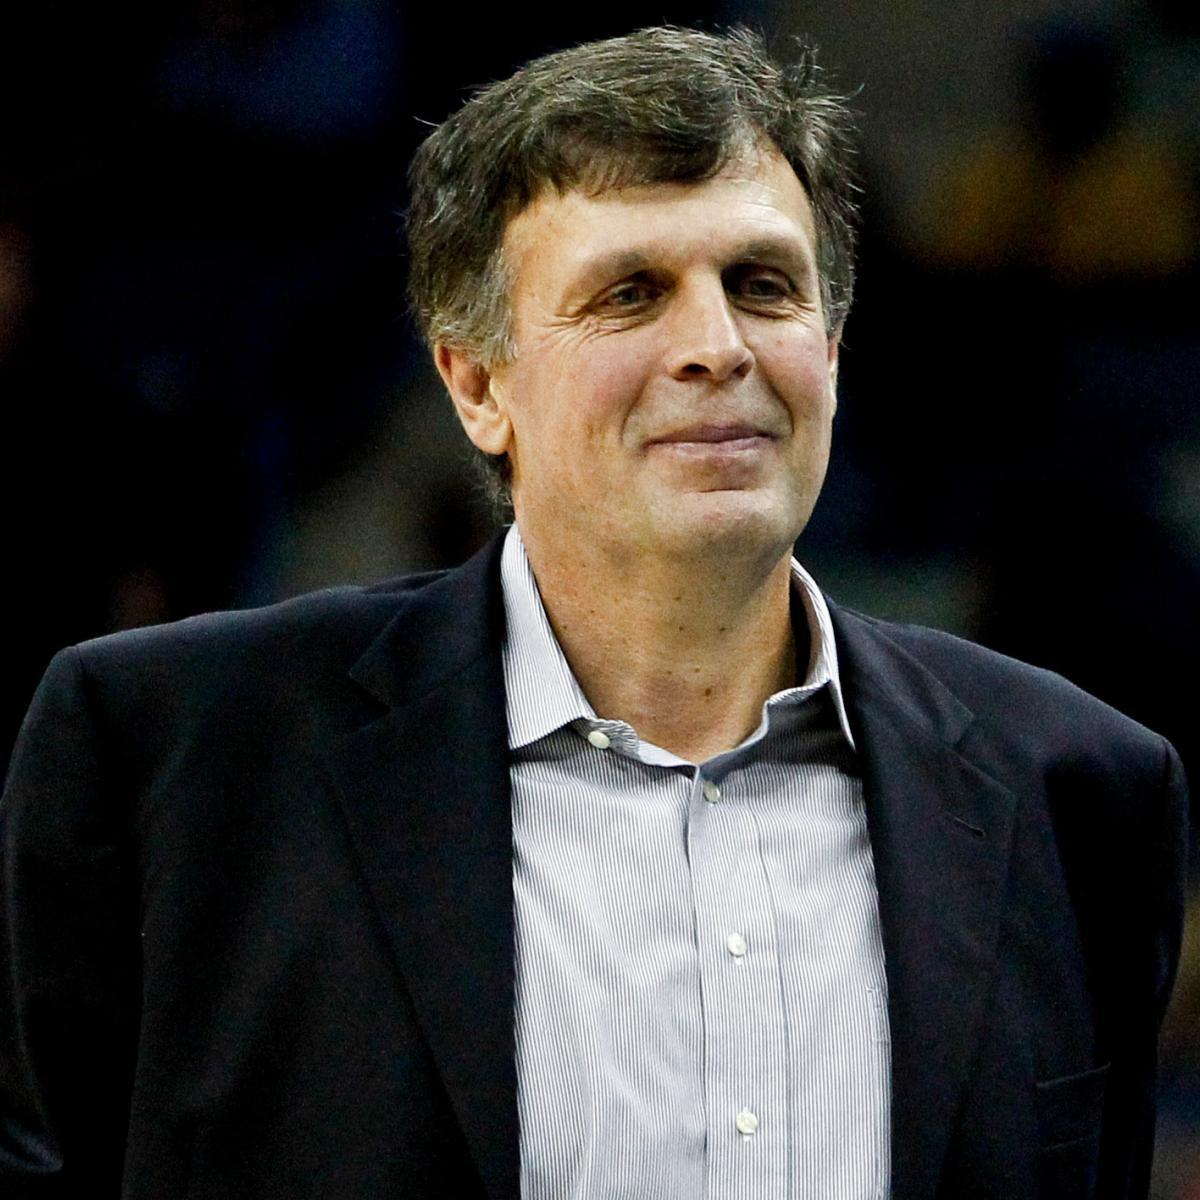 Kevin McHale's daughter passes away at 22 - SB Nation Boston